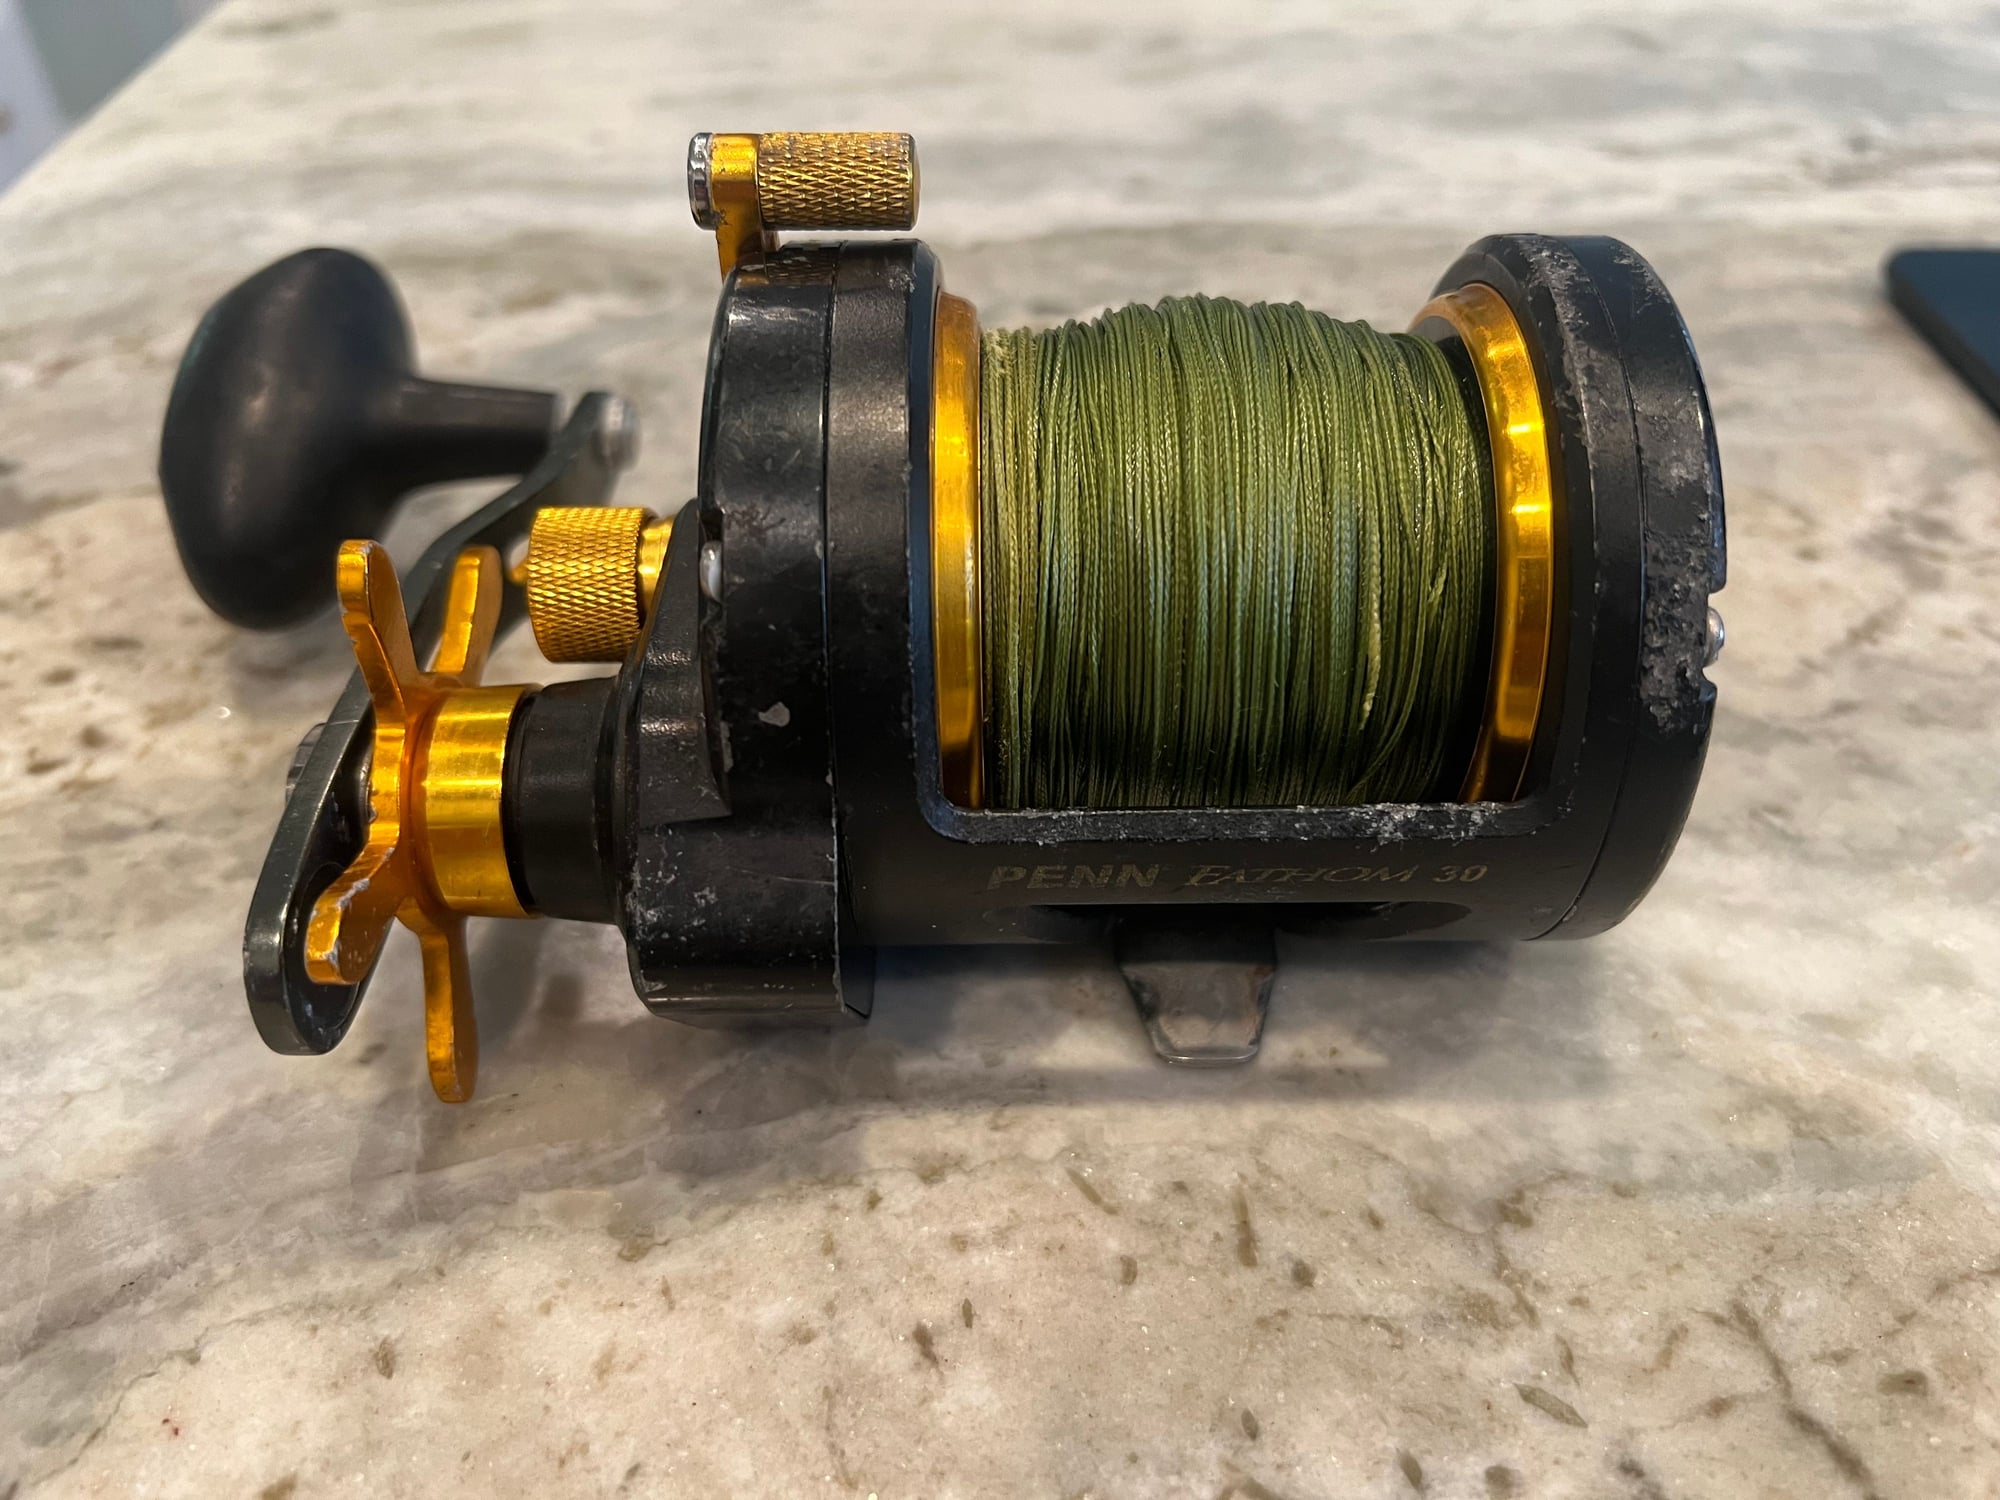 Used shimano/penn spinning reels for sale - The Hull Truth - Boating and  Fishing Forum